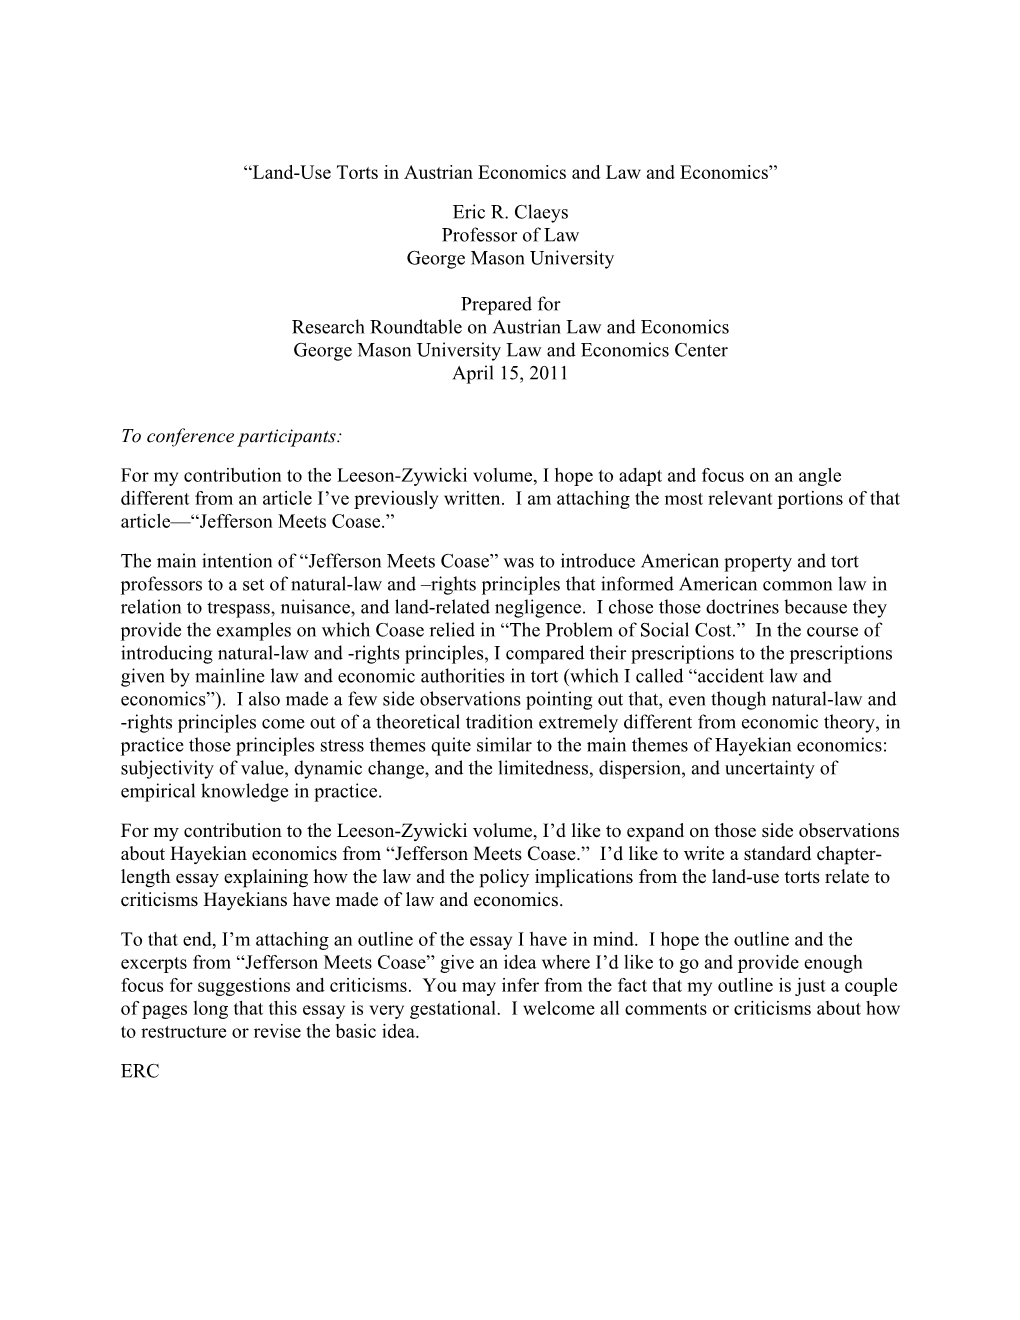 Land-Use Torts in Austrian Economics and Law and Economics” Eric R